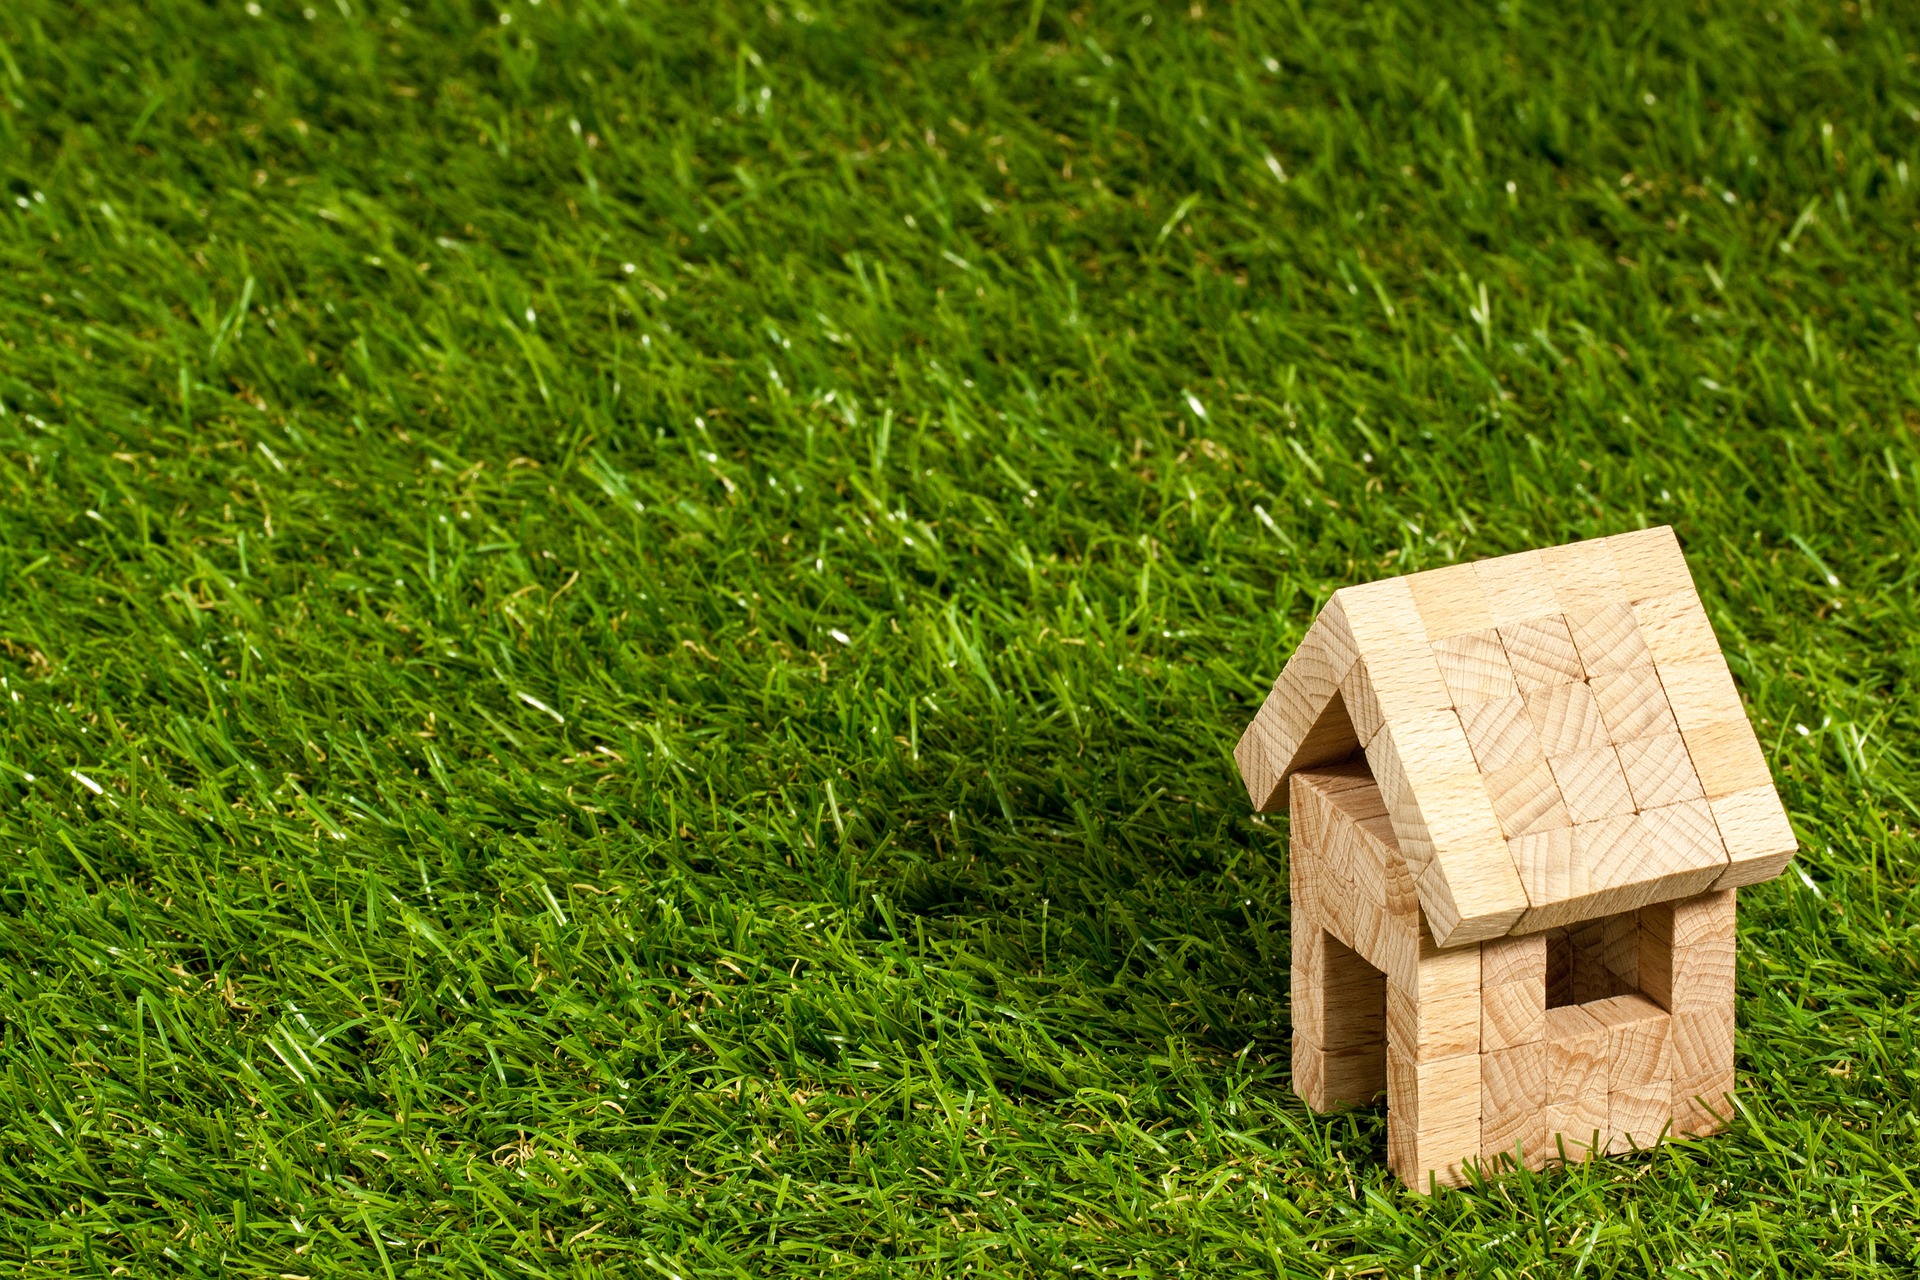 A wooden block house, on a green field; our Conveyancing Solicitors in Lancaster discuss the formal requirements when selling off land.